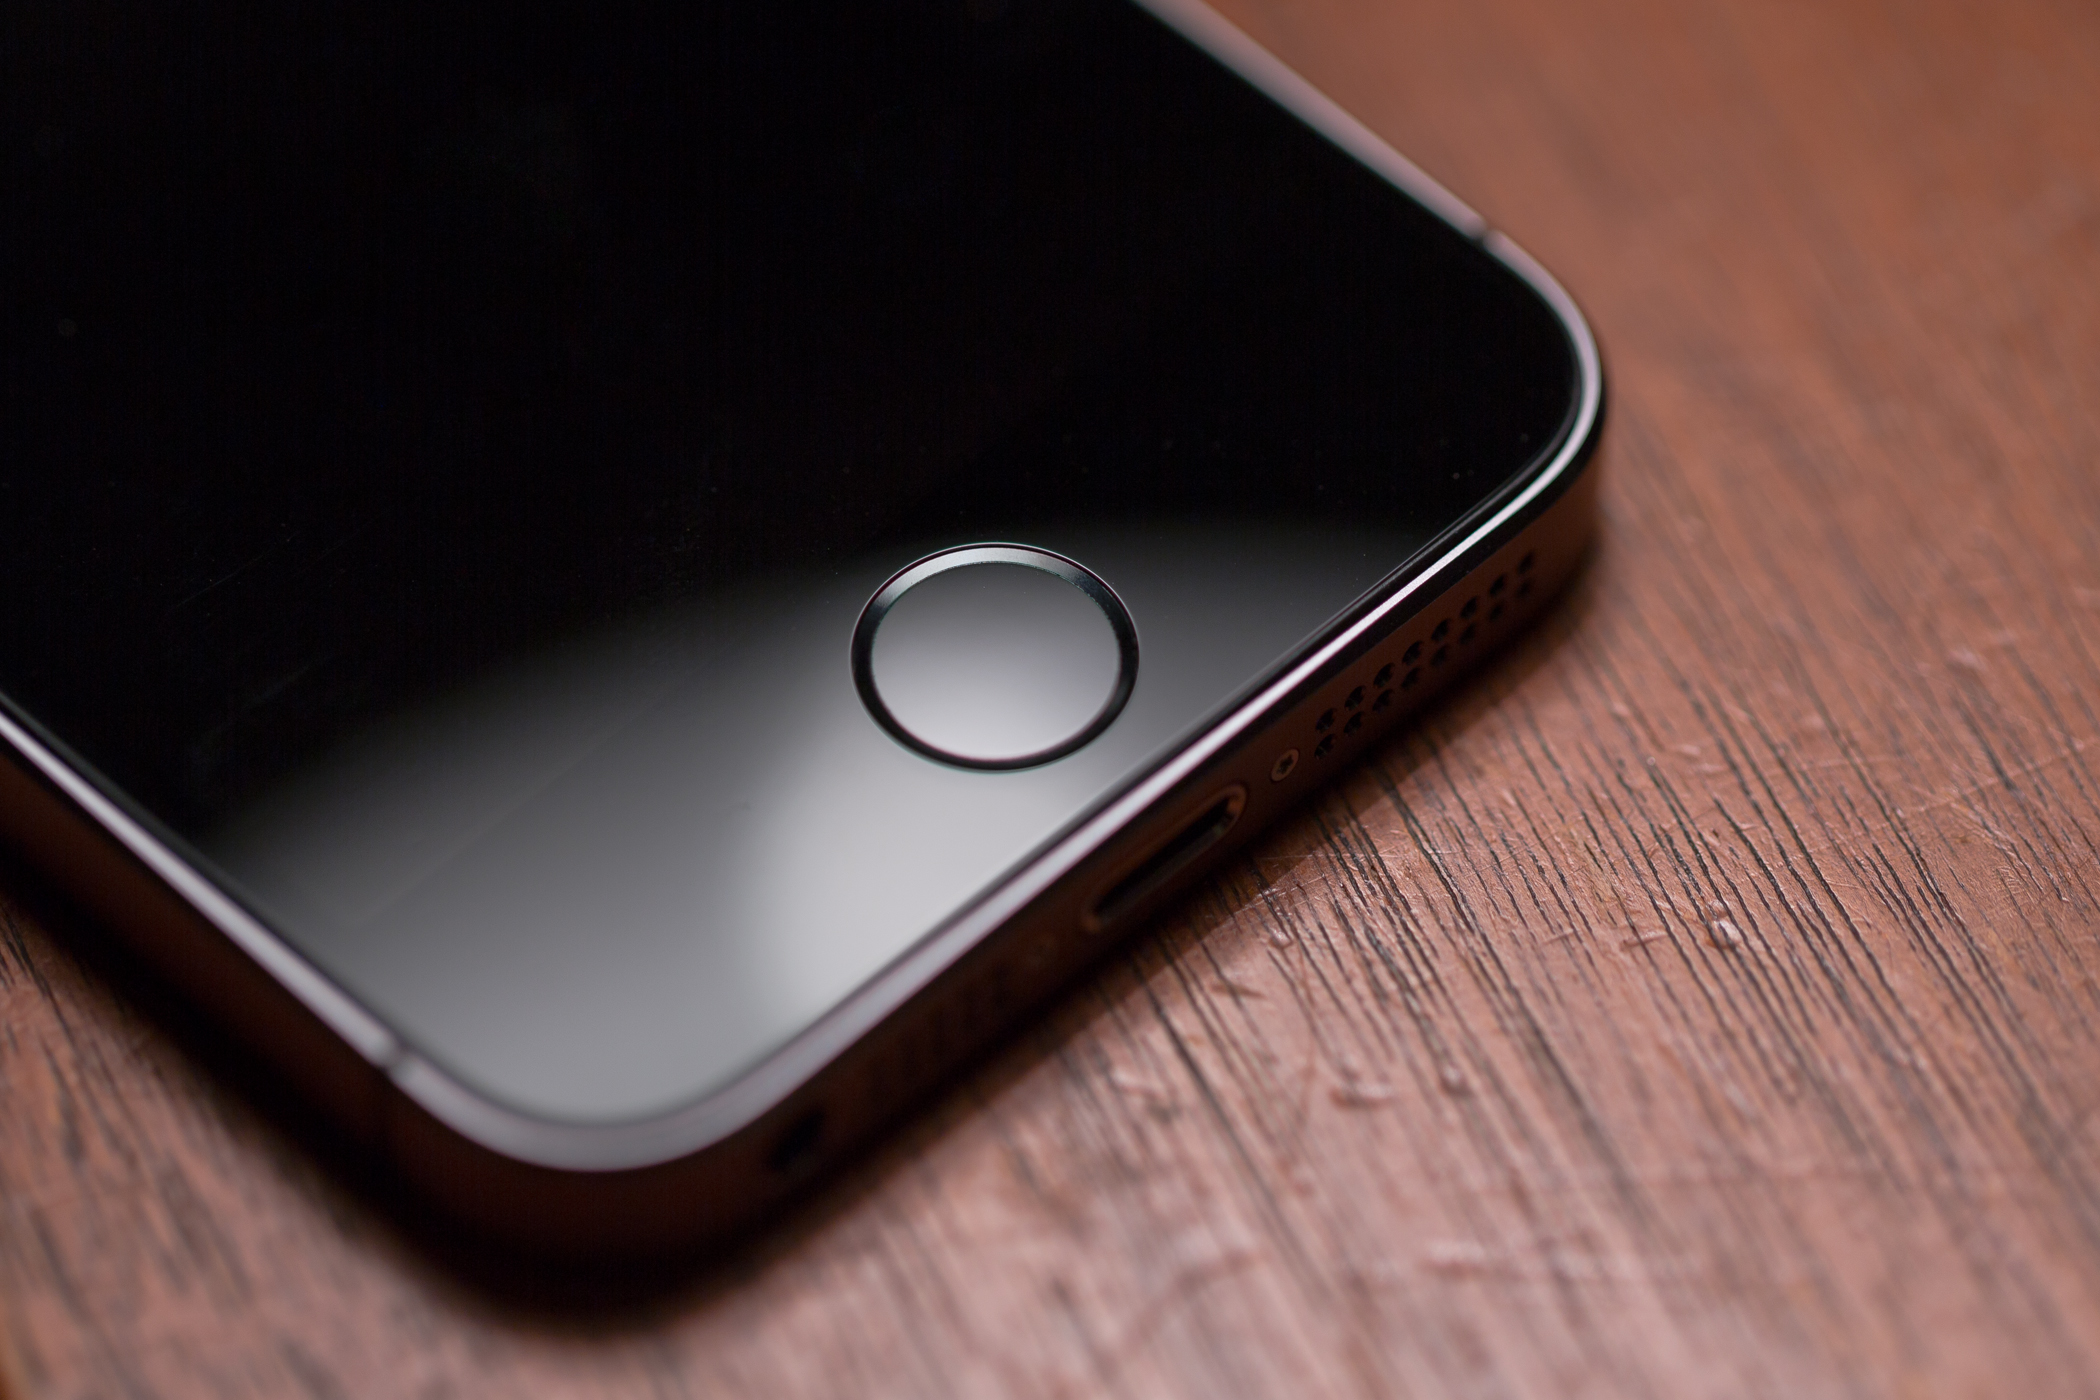 iphone-5s-home-button-touch-id.jpg